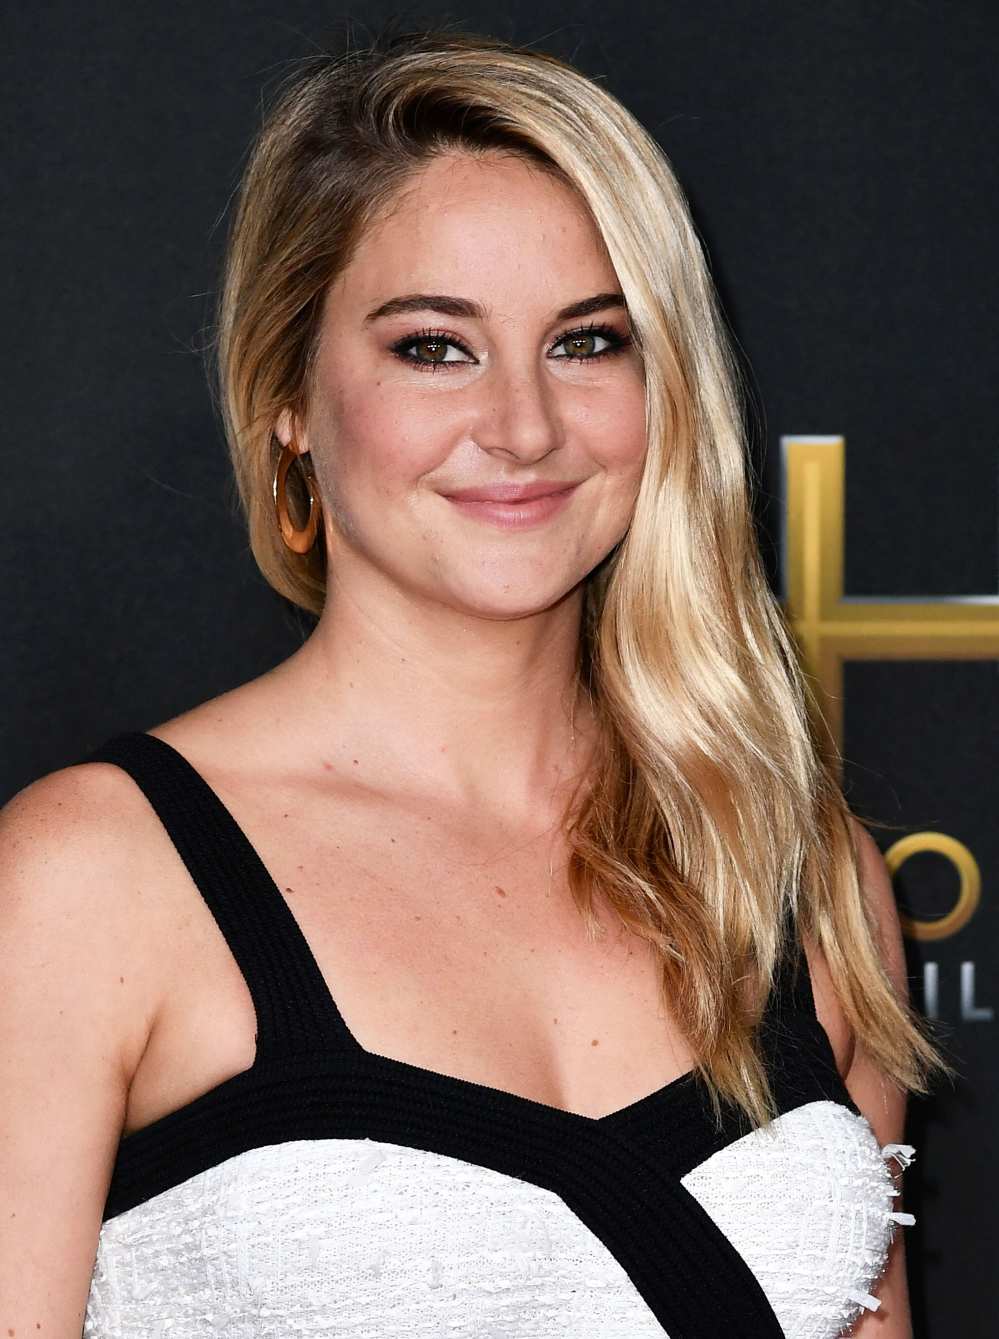 Everything We Know About Shailene Woodley’s Engagement Ring